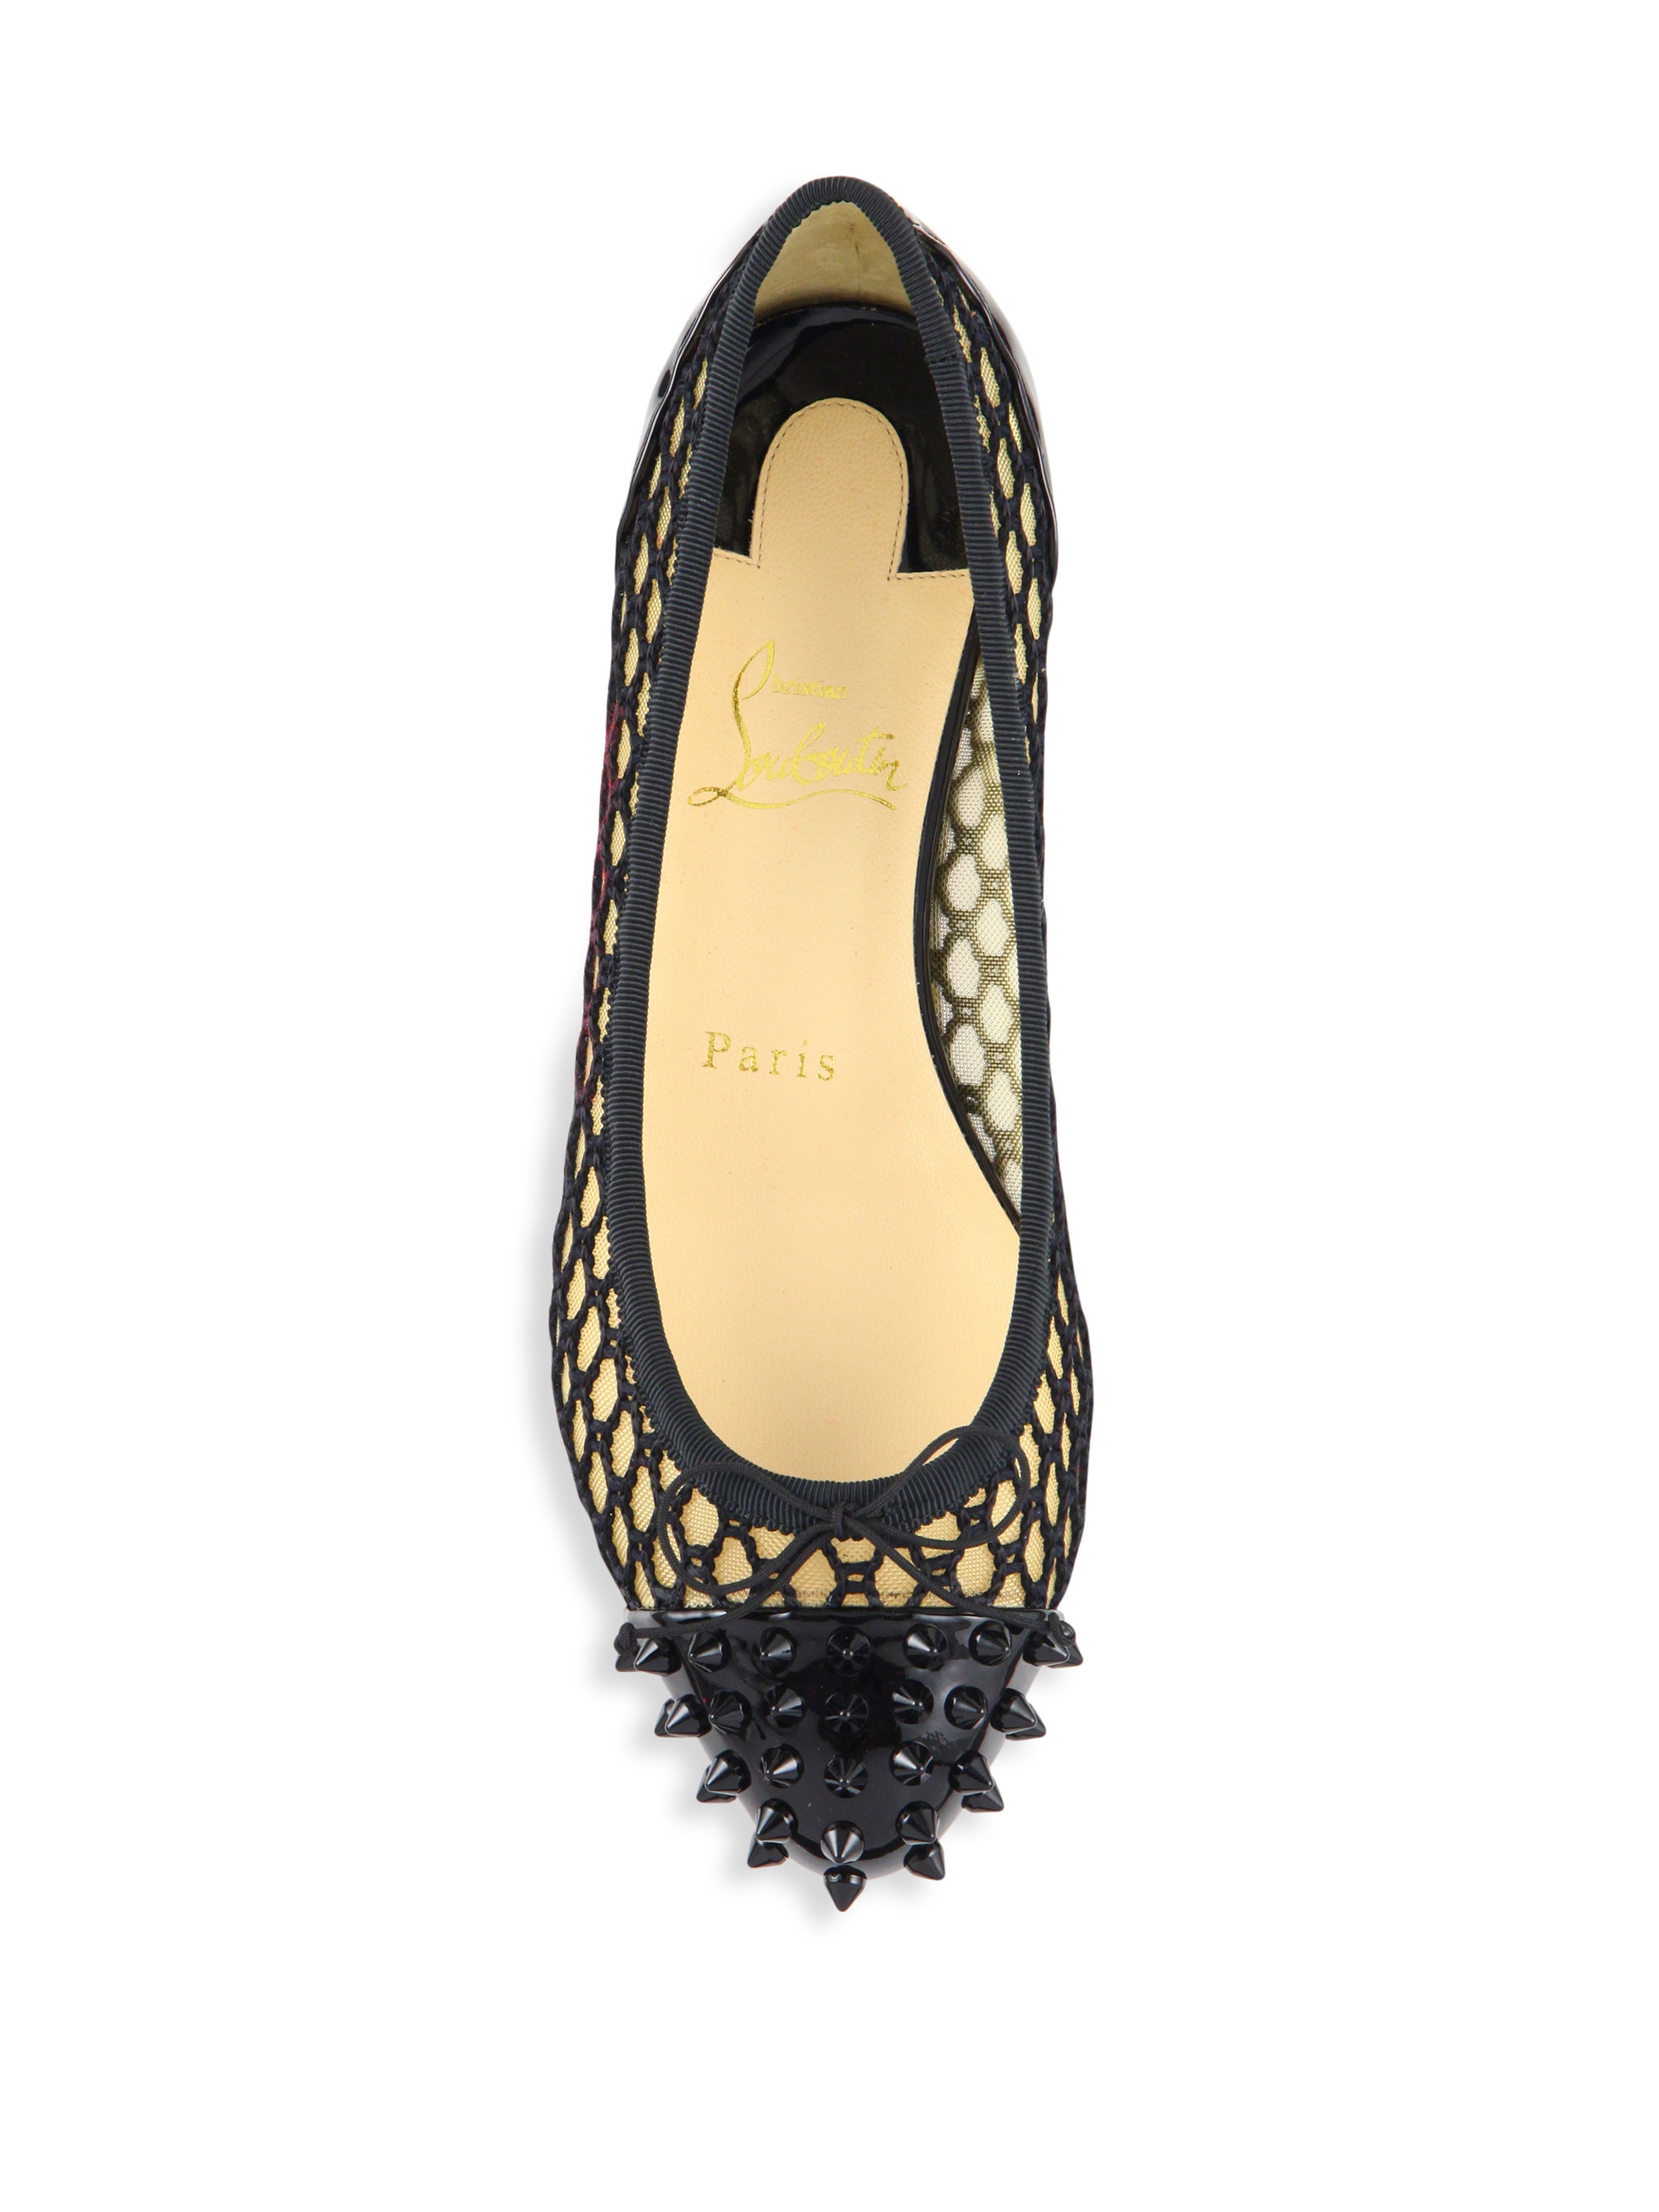 Christian louboutin Mix Patent Spiked Knotted Mesh Flats in Black ...